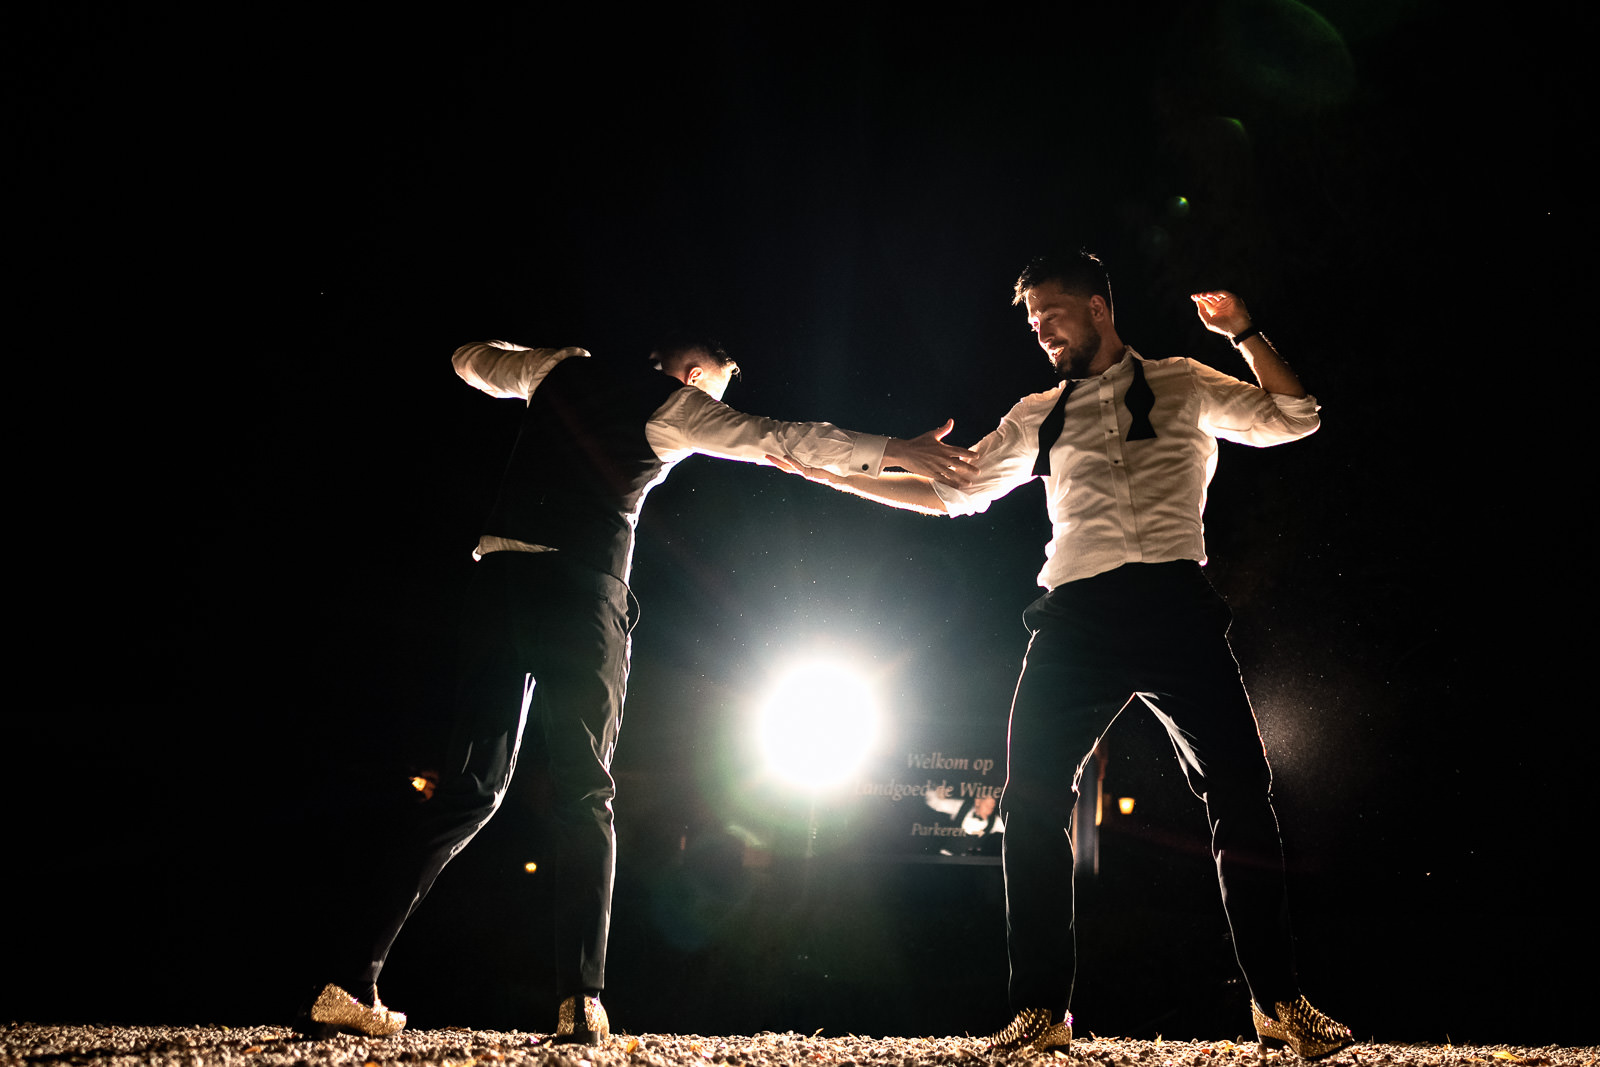 Two grooms dancing during a creative shoot in the dark